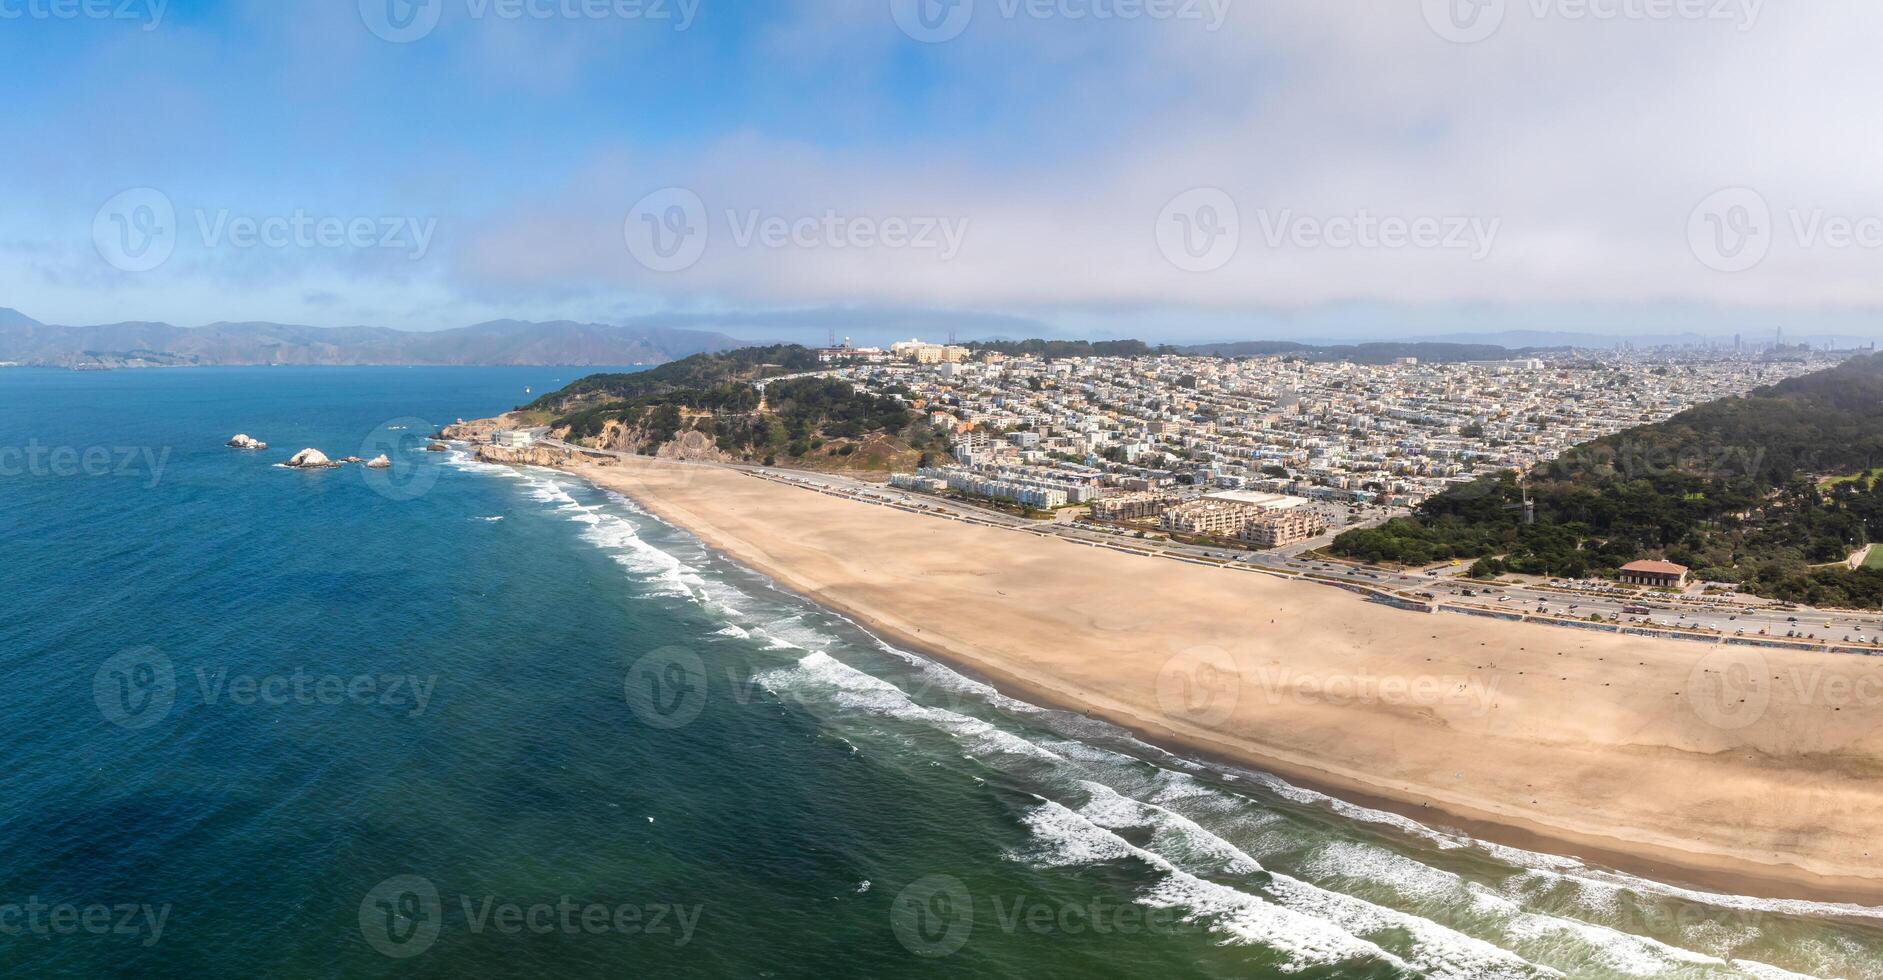 Where the sea meets the land in San Francisco. photo